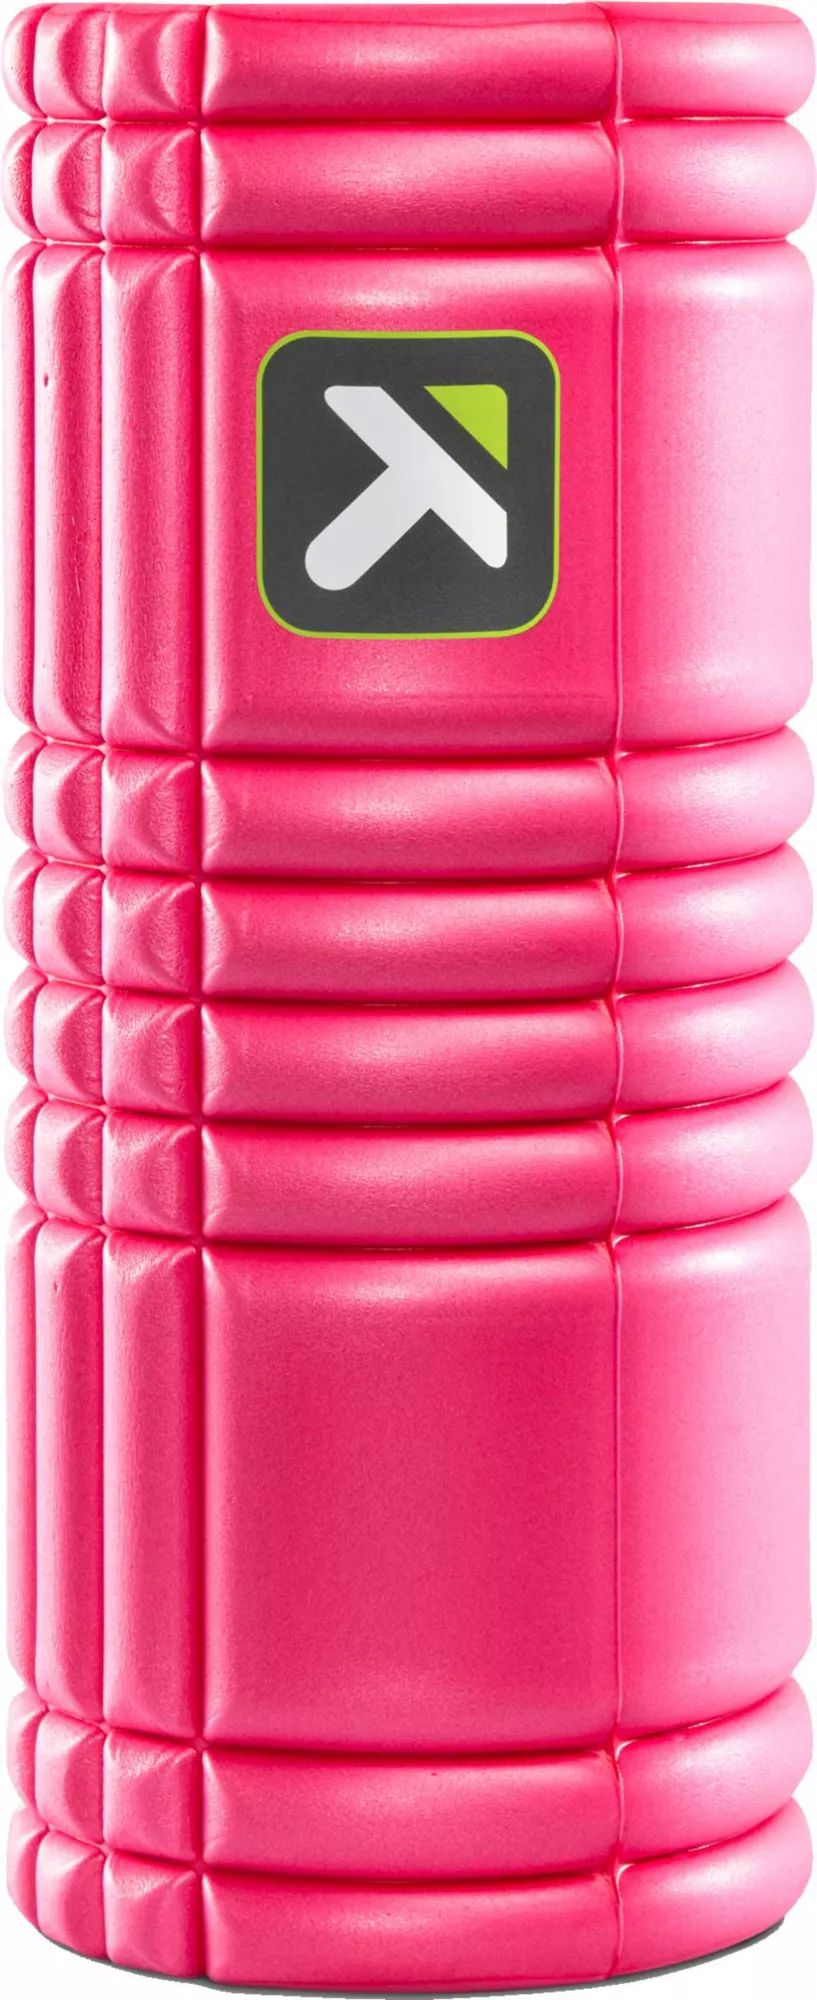 TriggerPoint GRID 1.0 Foam Roller, Pink | Dick's Sporting Goods